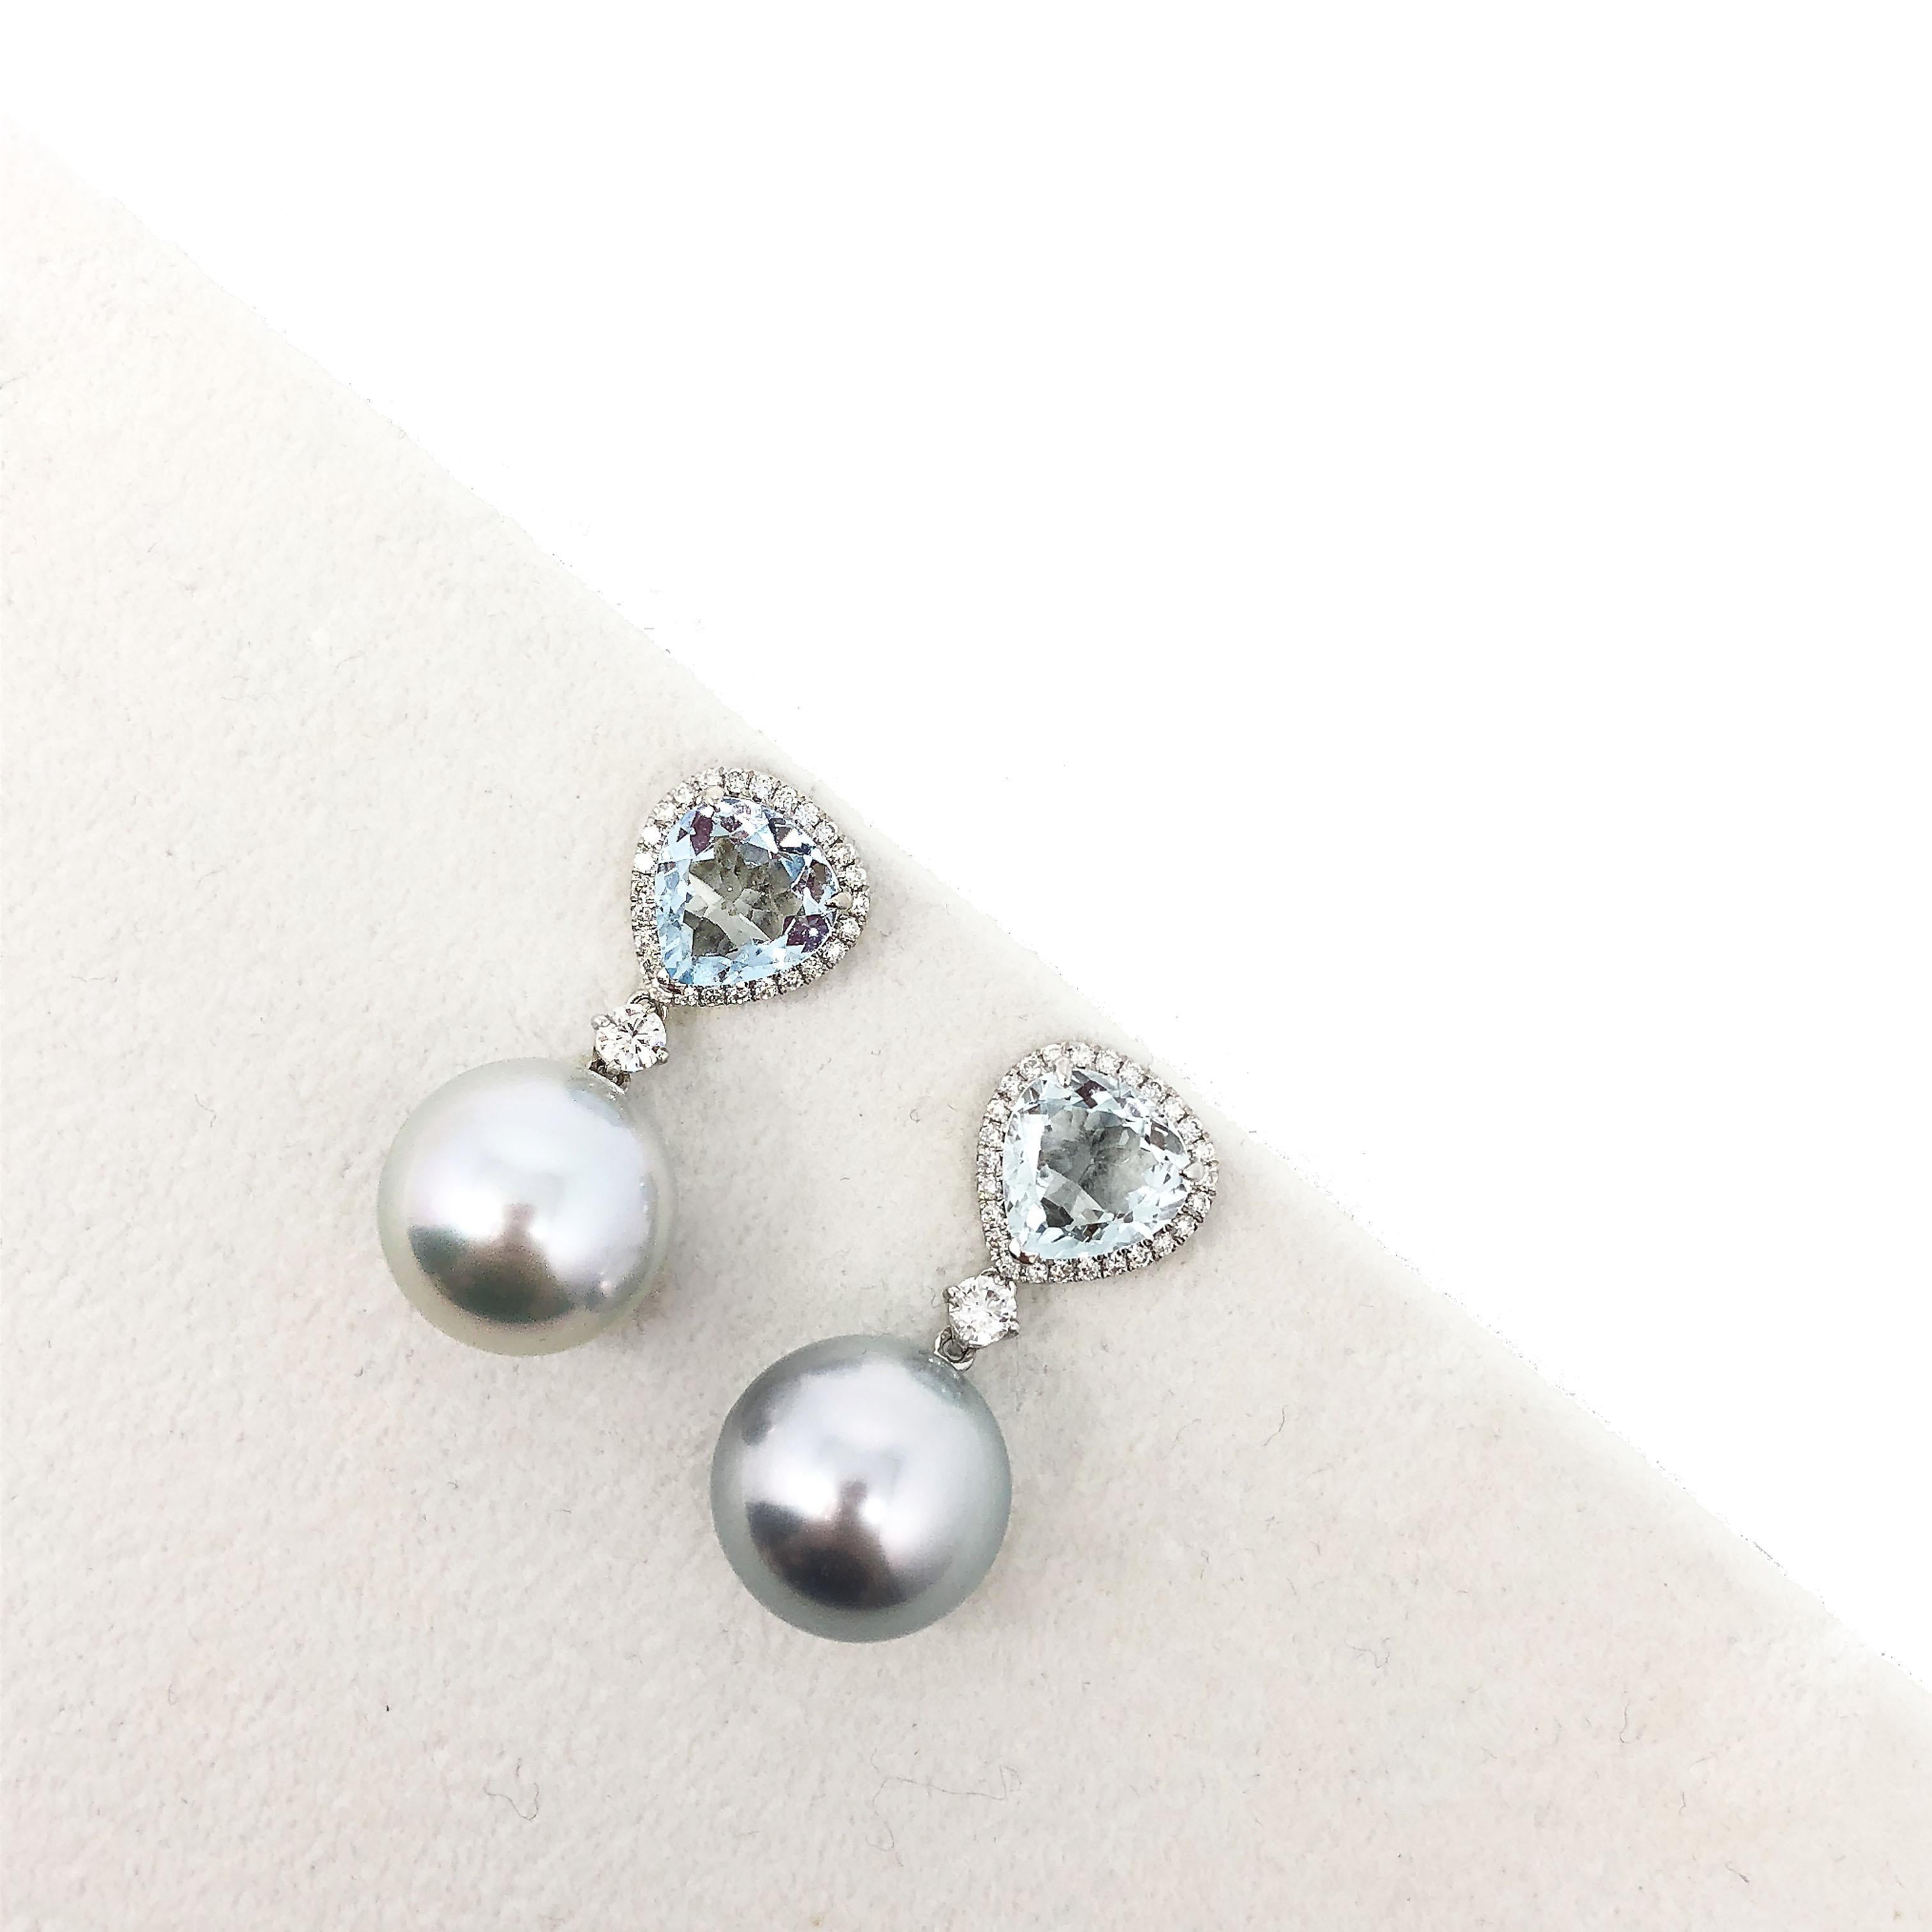 GILIN's Summer Crush! 
Could you imagine Aquamarines and Southsea Pearls can actually match so perfectly? This pair is absolutely an ideal choice to go with your summer maxi dress!

The pair is made in 18K White Gold, setting with 3.97 Carat pear